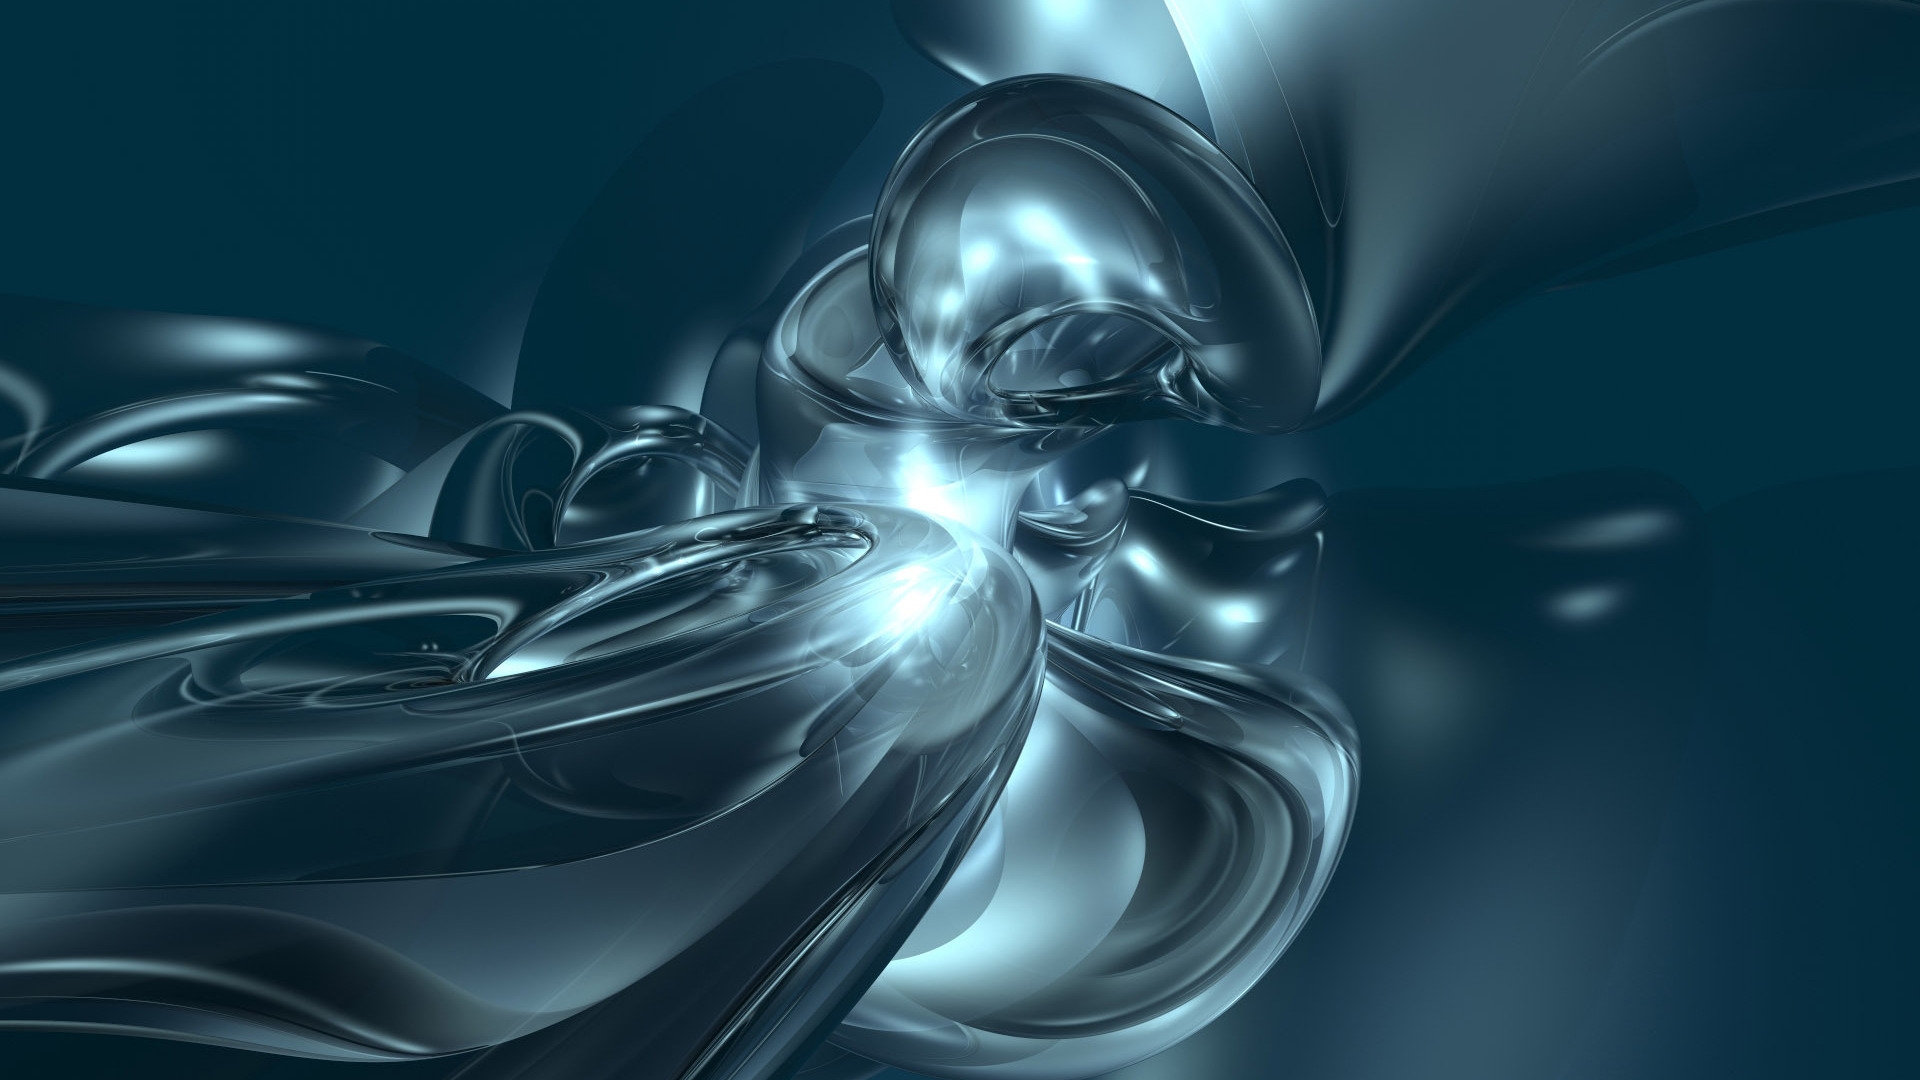 Abstract 3D Creation for 1920 x 1080 HDTV 1080p resolution